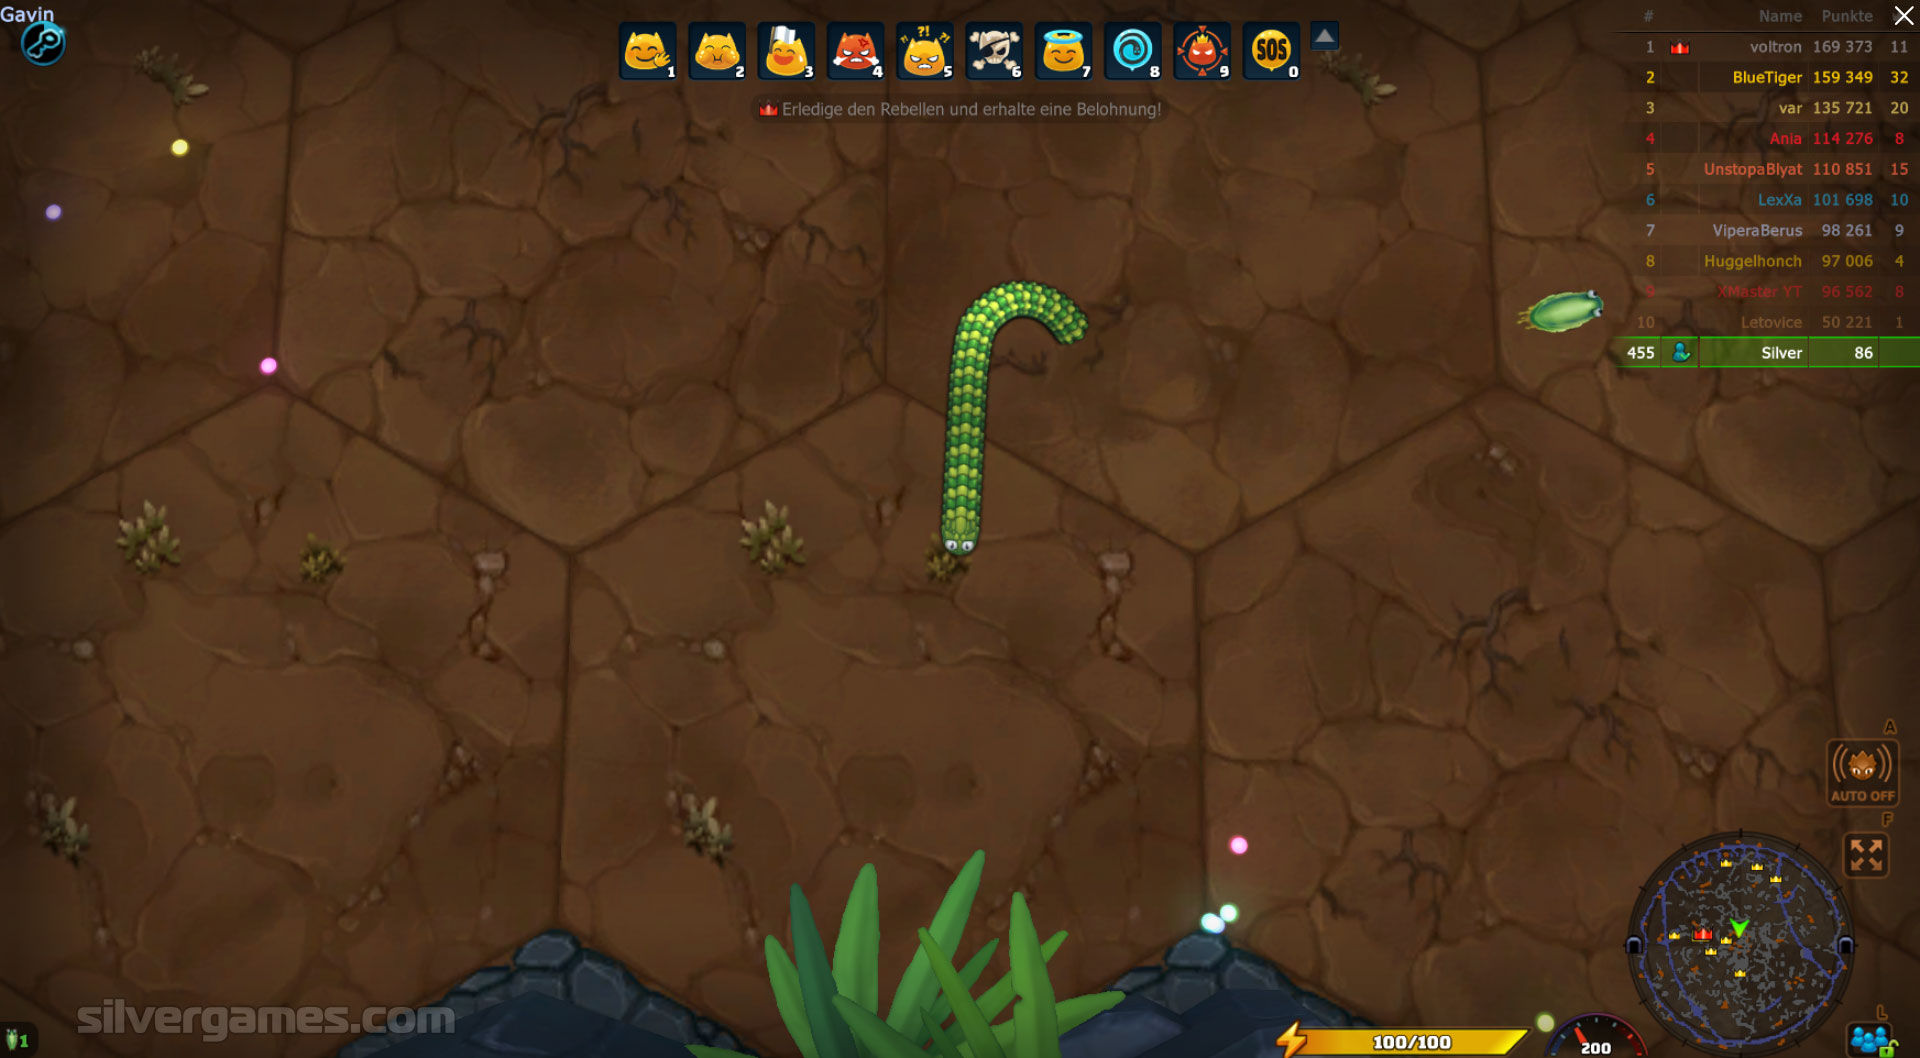 Little Big Snake - Free Online Game - Play Now